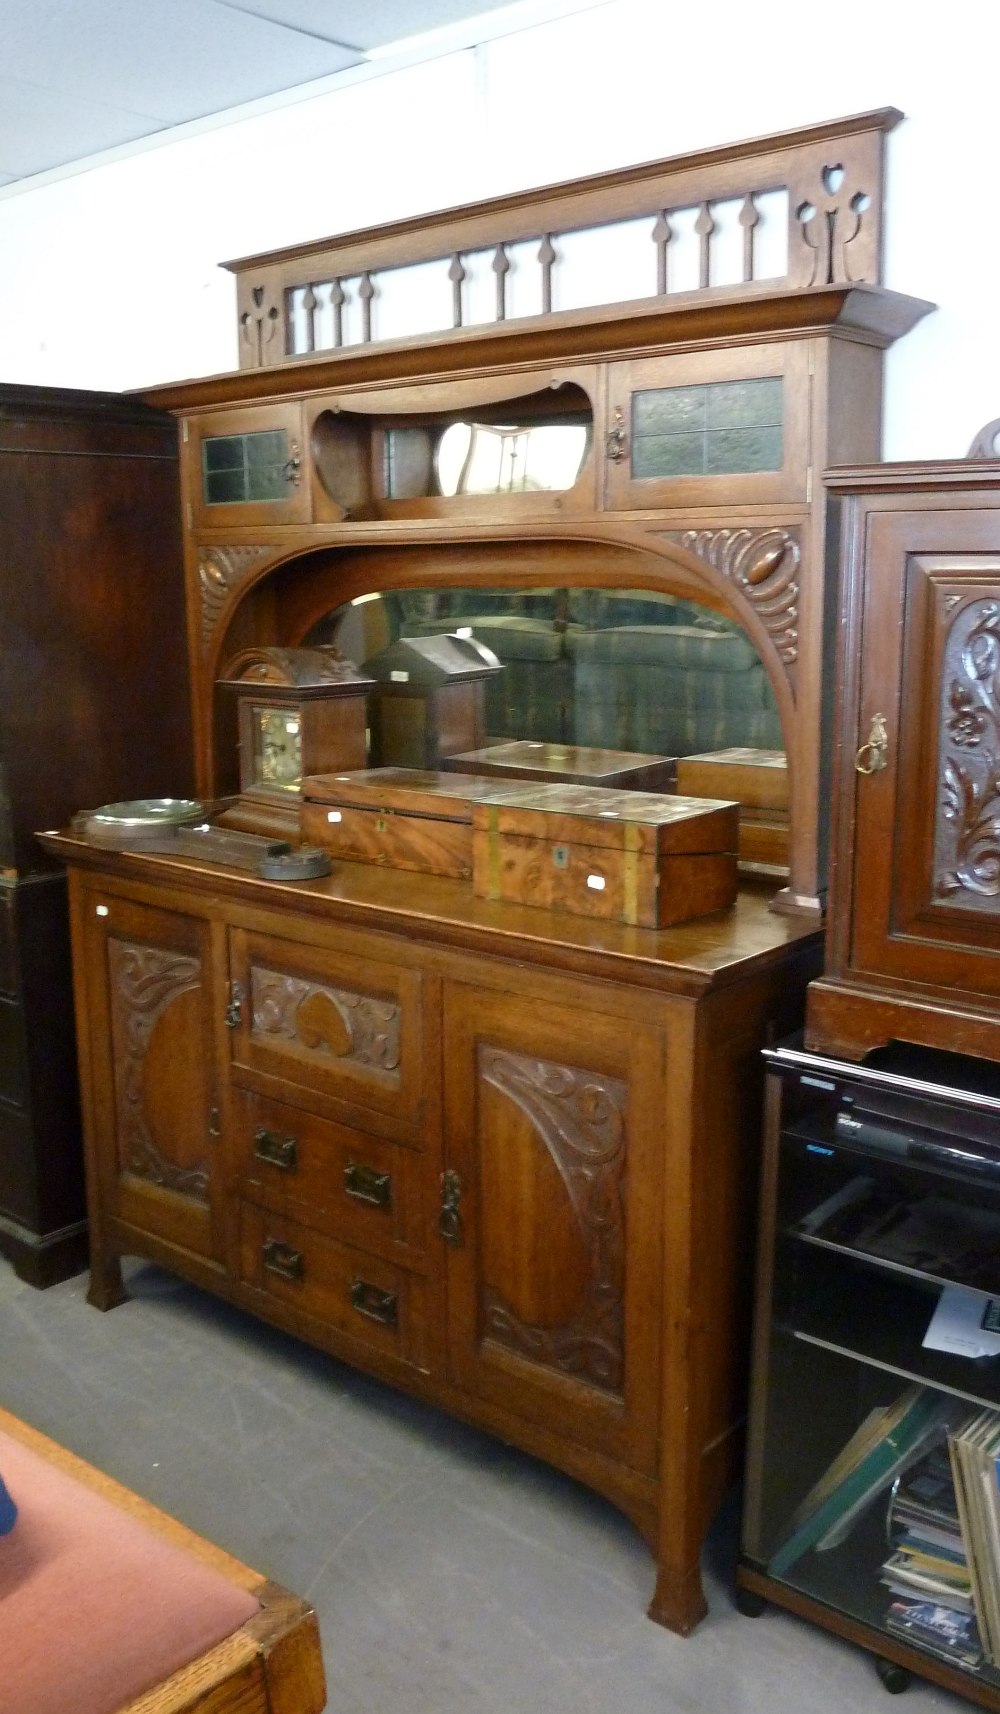 A LATE VICTORIAN CARVED OAK ART NOUVEAU DESIGN MIRROR BACK SIDEBOARD, THE ARCADED BACK INCORPORATING